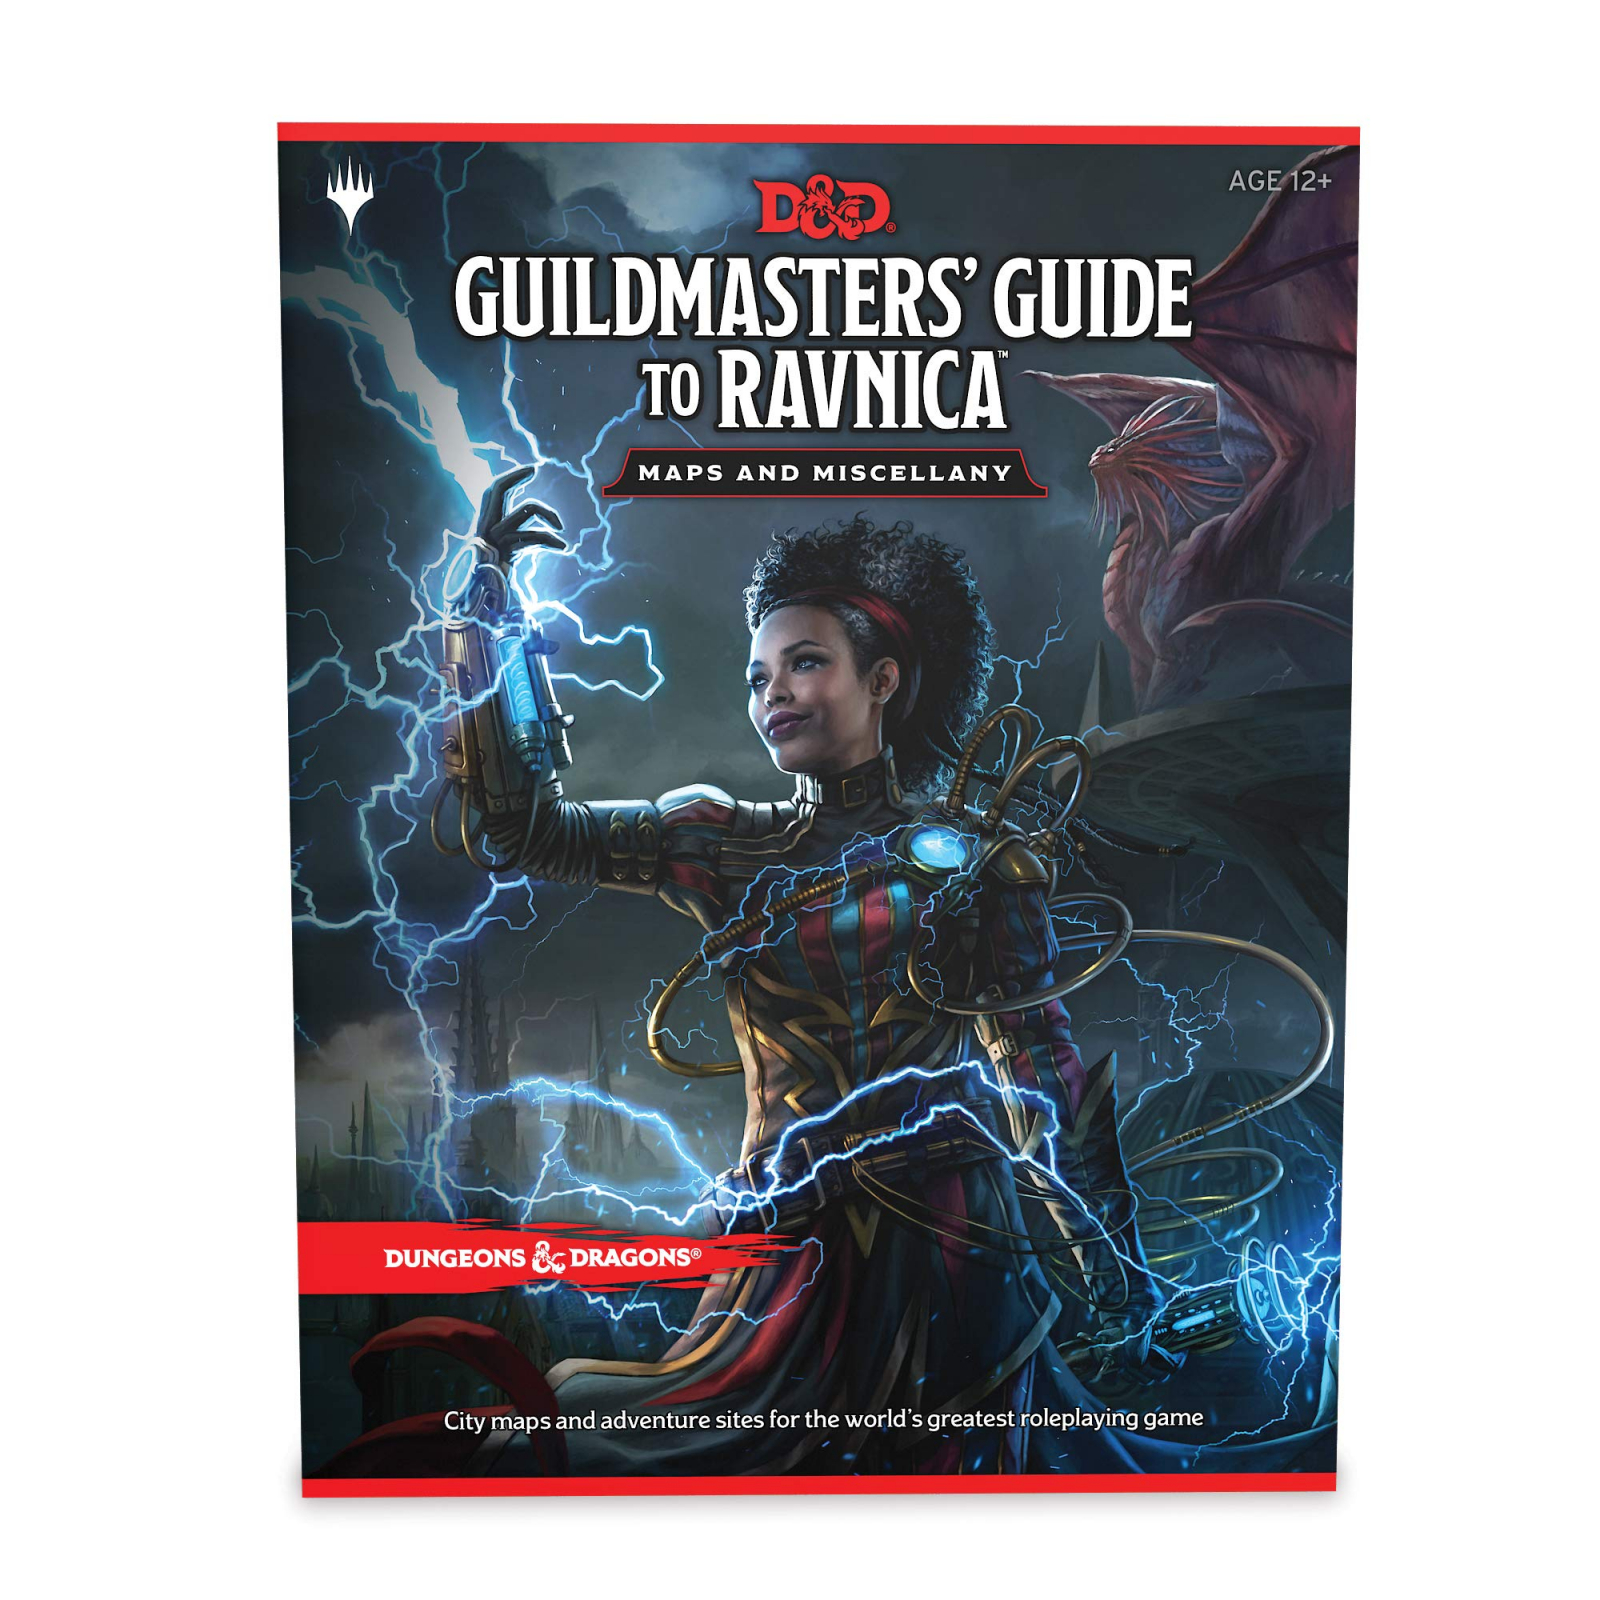 DD RPG - Guildmaster s Guide to Ravnica RPG Maps and Miscellany - EN